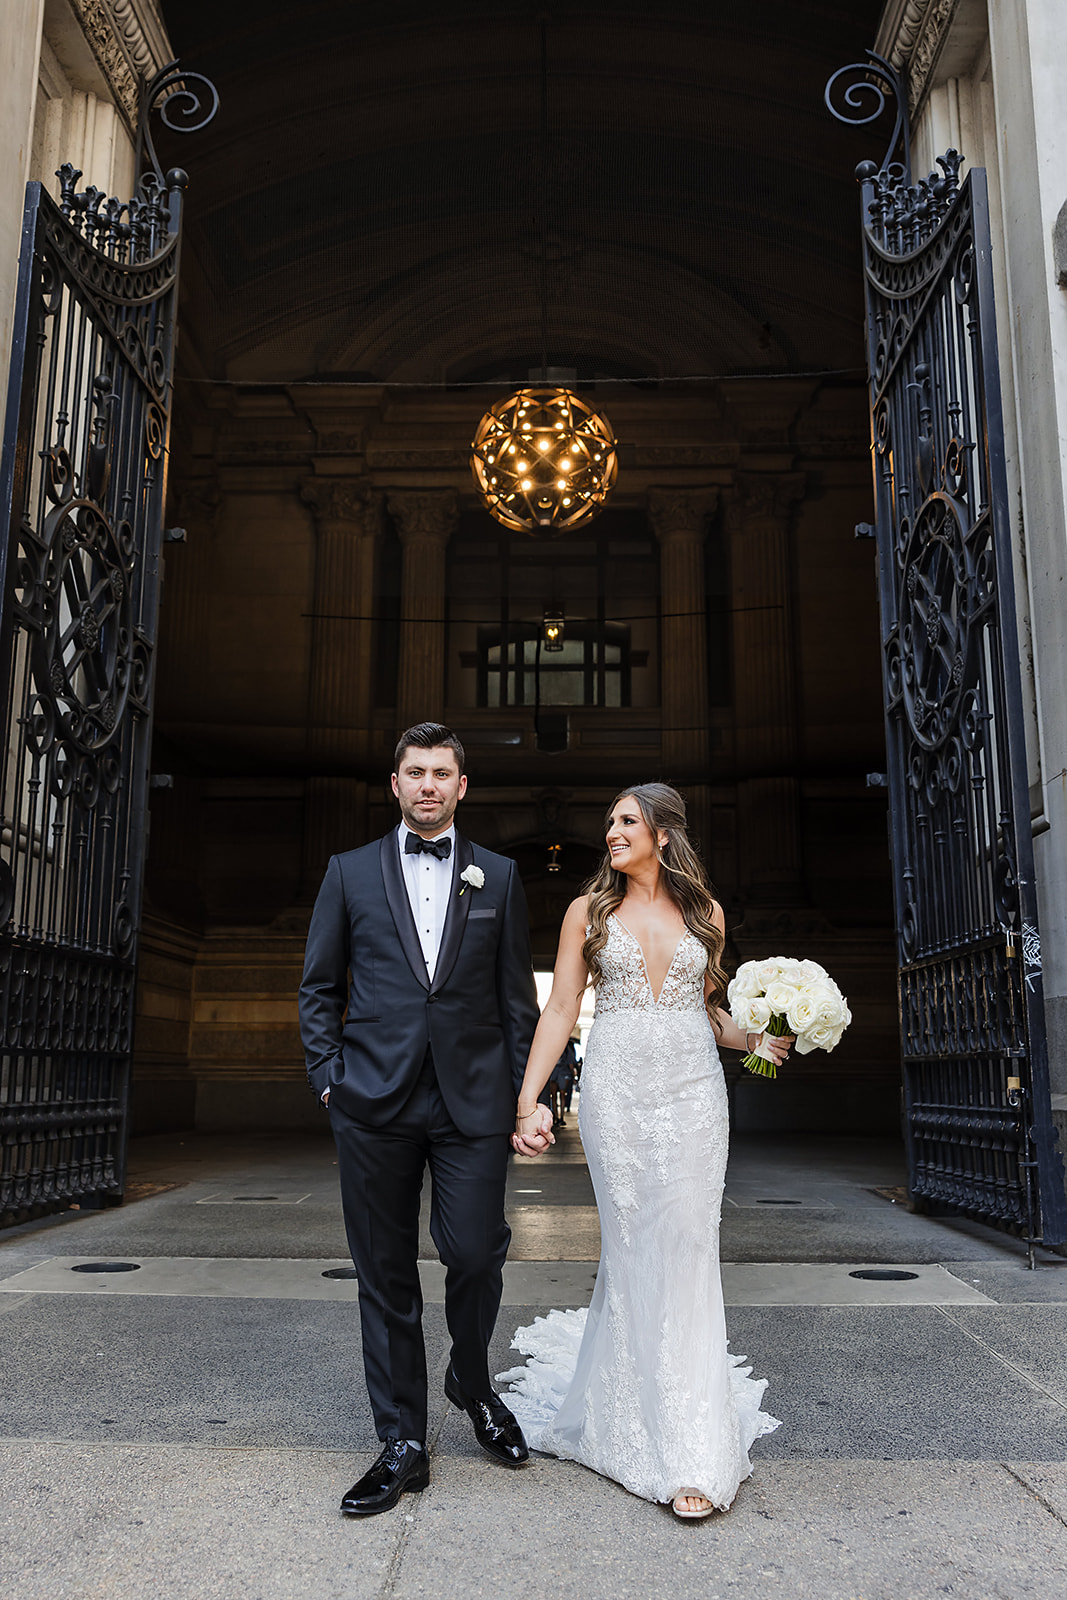 Wedding chic and effortless portrait of the bride and groom at City Hall Philadelphia walking and holding hands